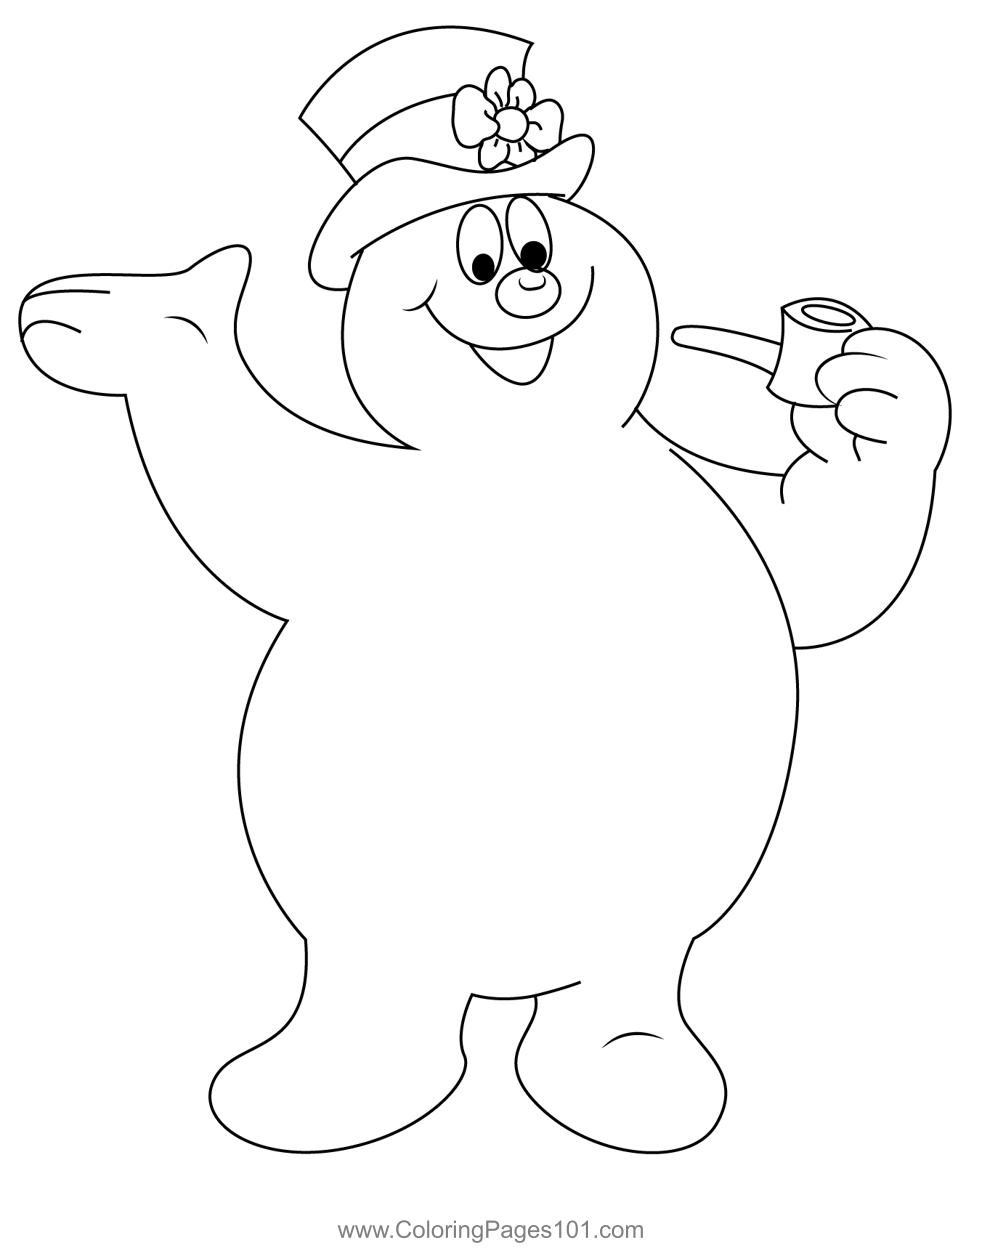 Happy frosty the snowman coloring page for kids